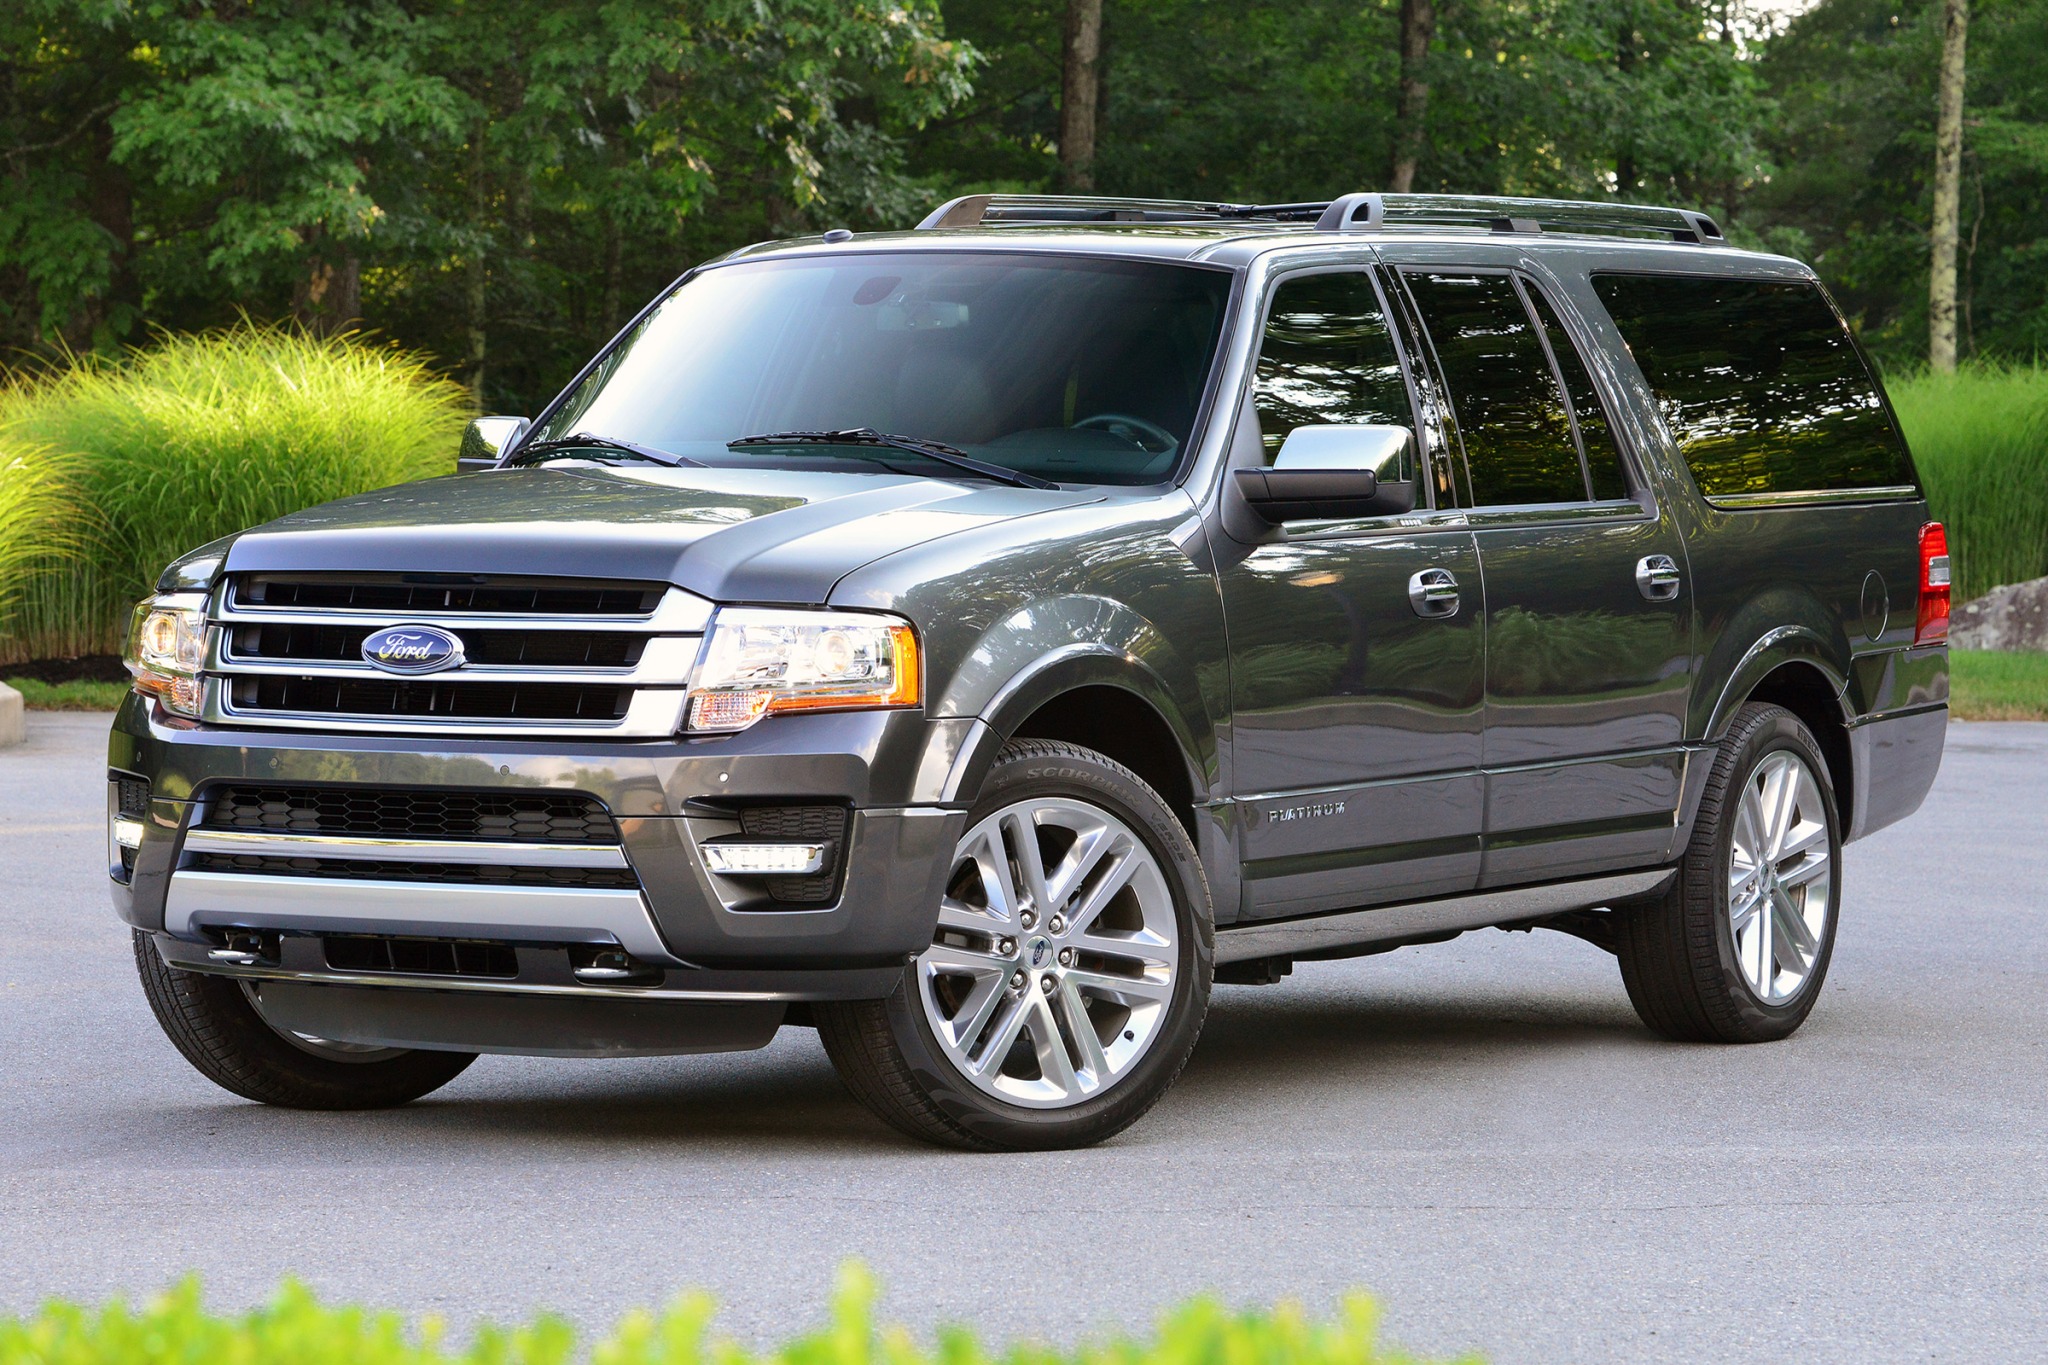 2017 Ford Expedition VIN Check, Specs & Recalls - AutoDetective